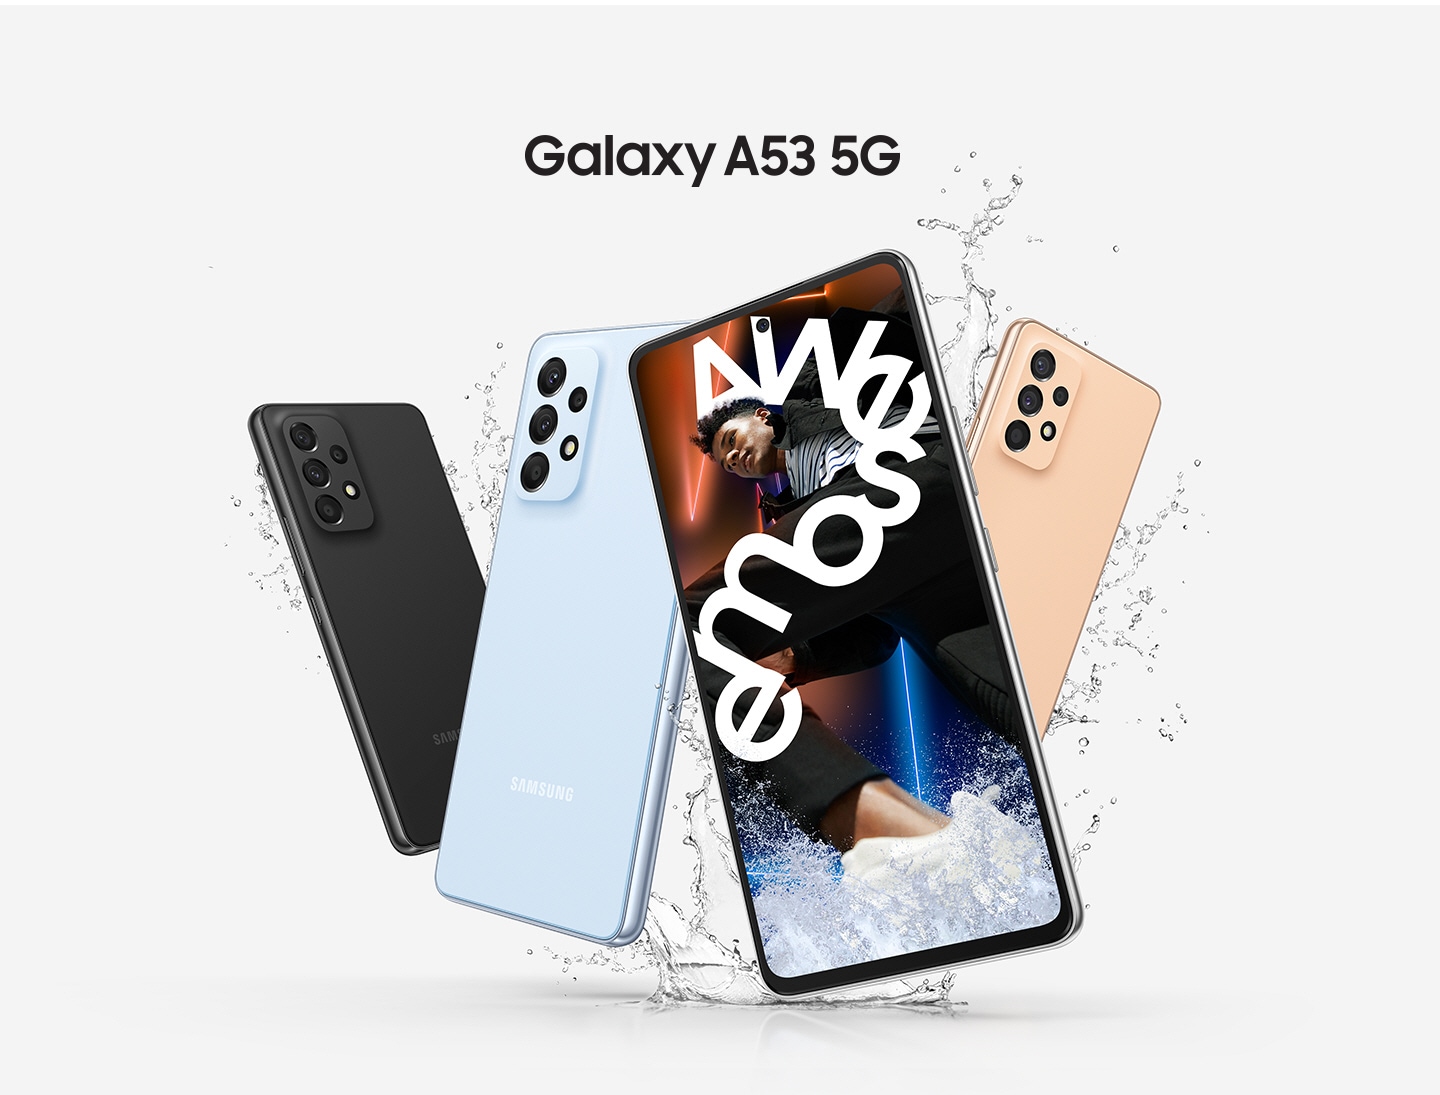 Four Galaxy A53 5G devices are shown with three of them showing the backside to display the Awesome Black, Awesome Blue and Awesome Peach colorways and a single front-facing Galaxy A53 5G shows a vivid picture of a man who is wrapped in white text reading Awesome.